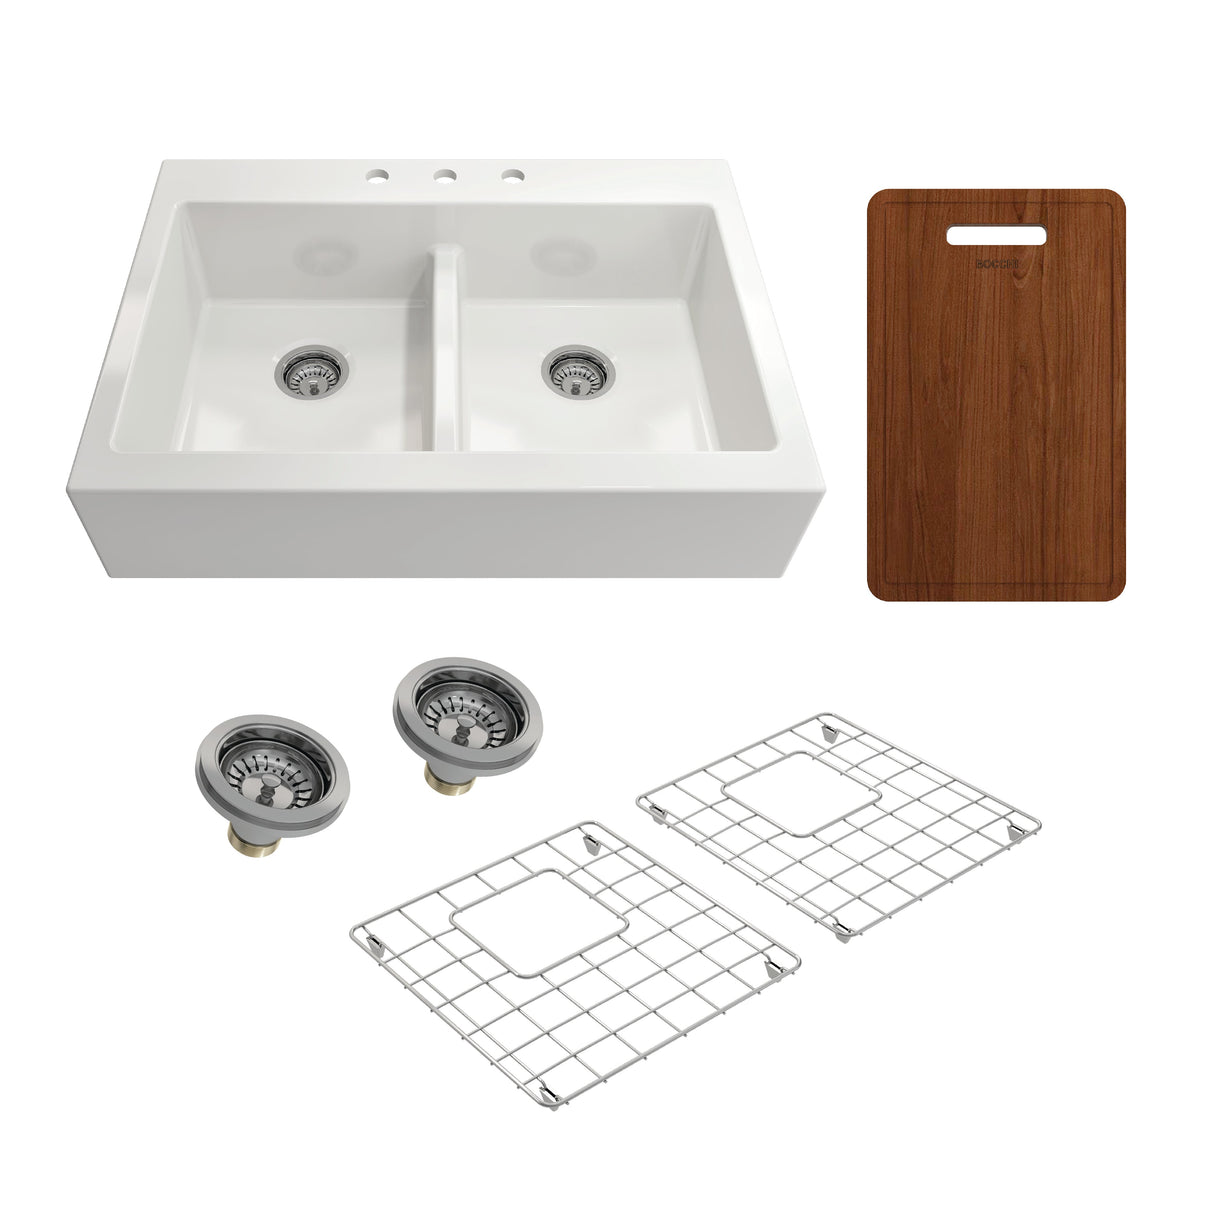 BOCCHI 1501-001-KIT1 Kit: 1501 Nuova Apron Front Drop-In Fireclay 34 in. 50/50 Double Bowl Kitchen Sink with Protective Bottom Grids and Strainers & Cutting Board